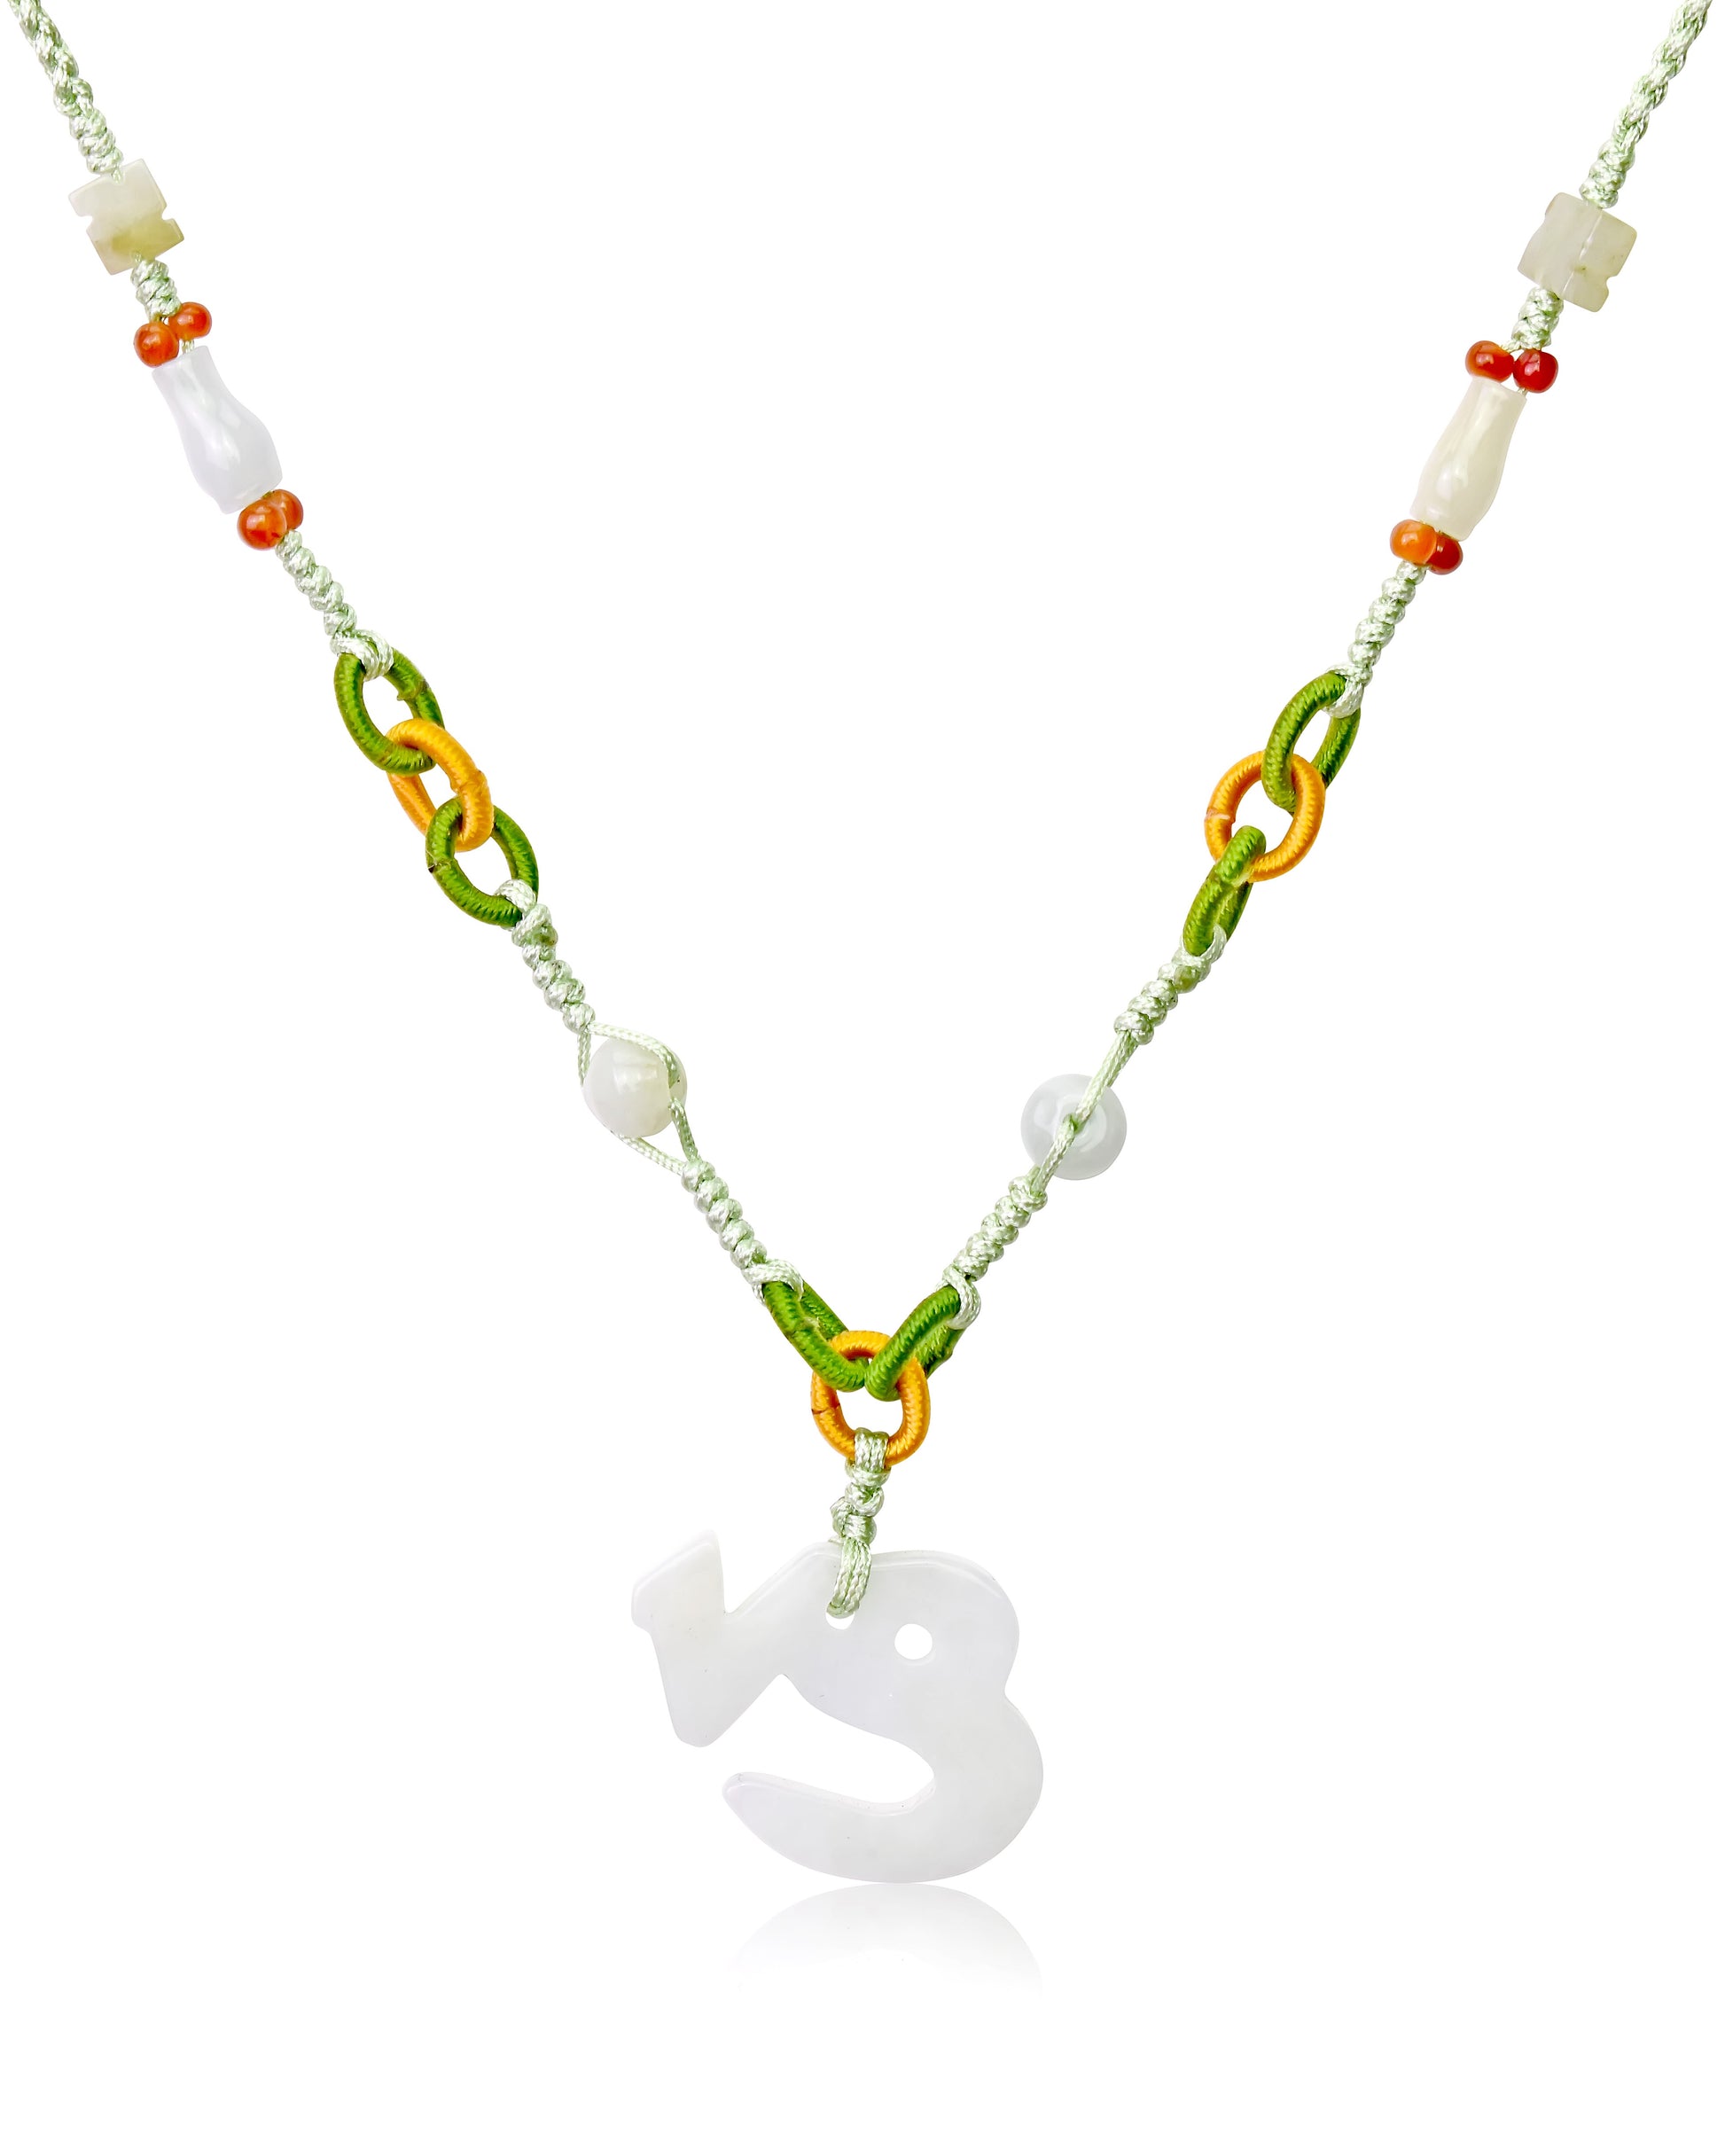 Feel the Love and Passion with a Capricorn Handmade Jade Pendant made with Sea Green Cord